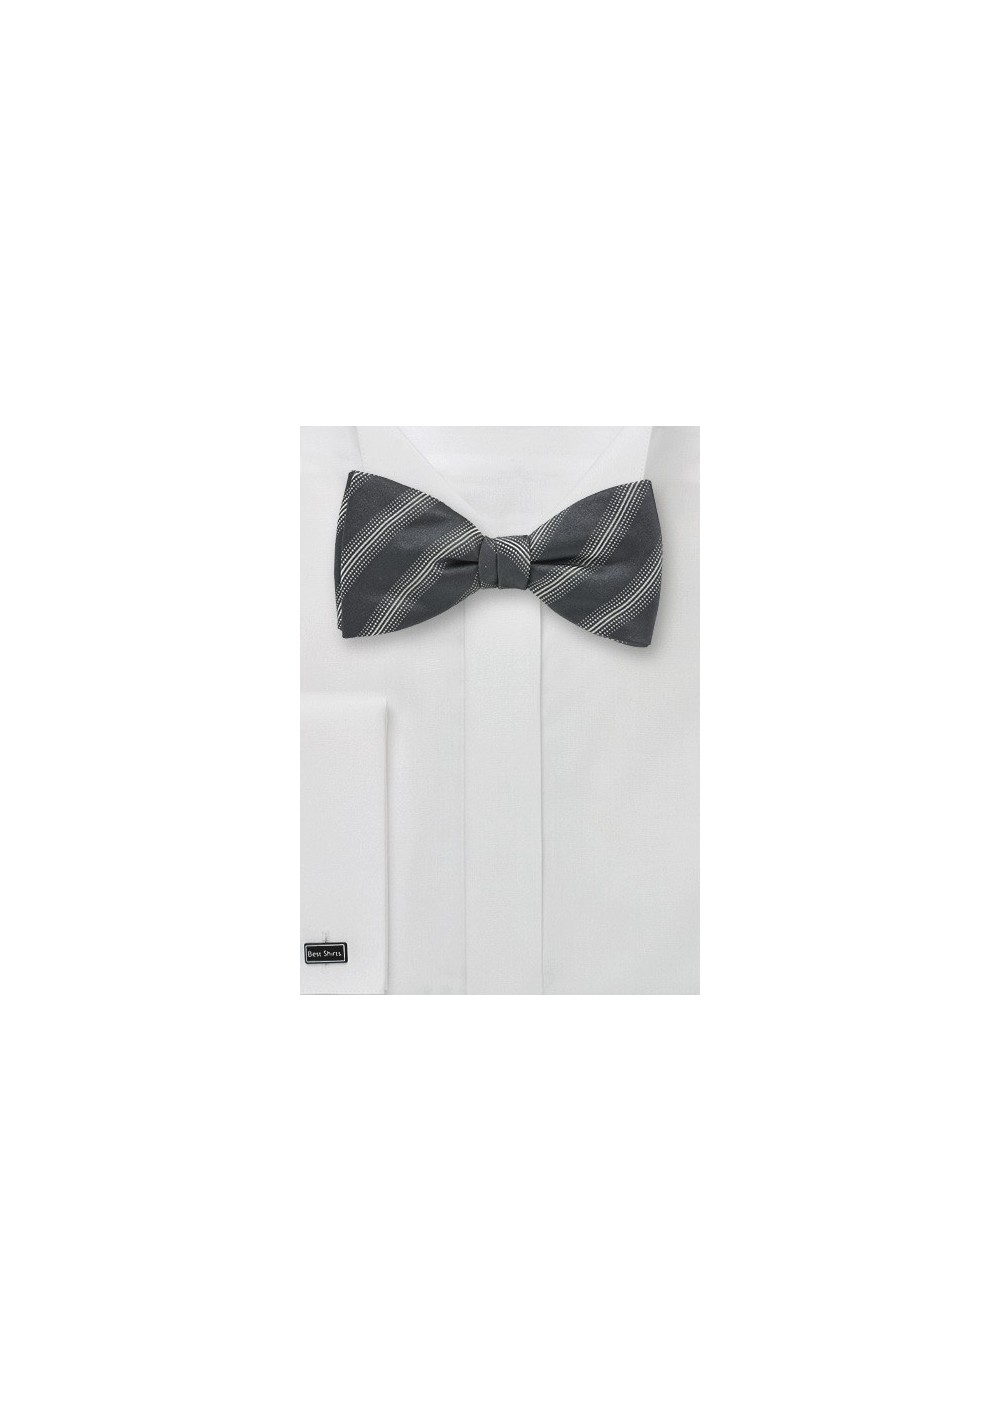 Striped Bow Tie in Charcoal